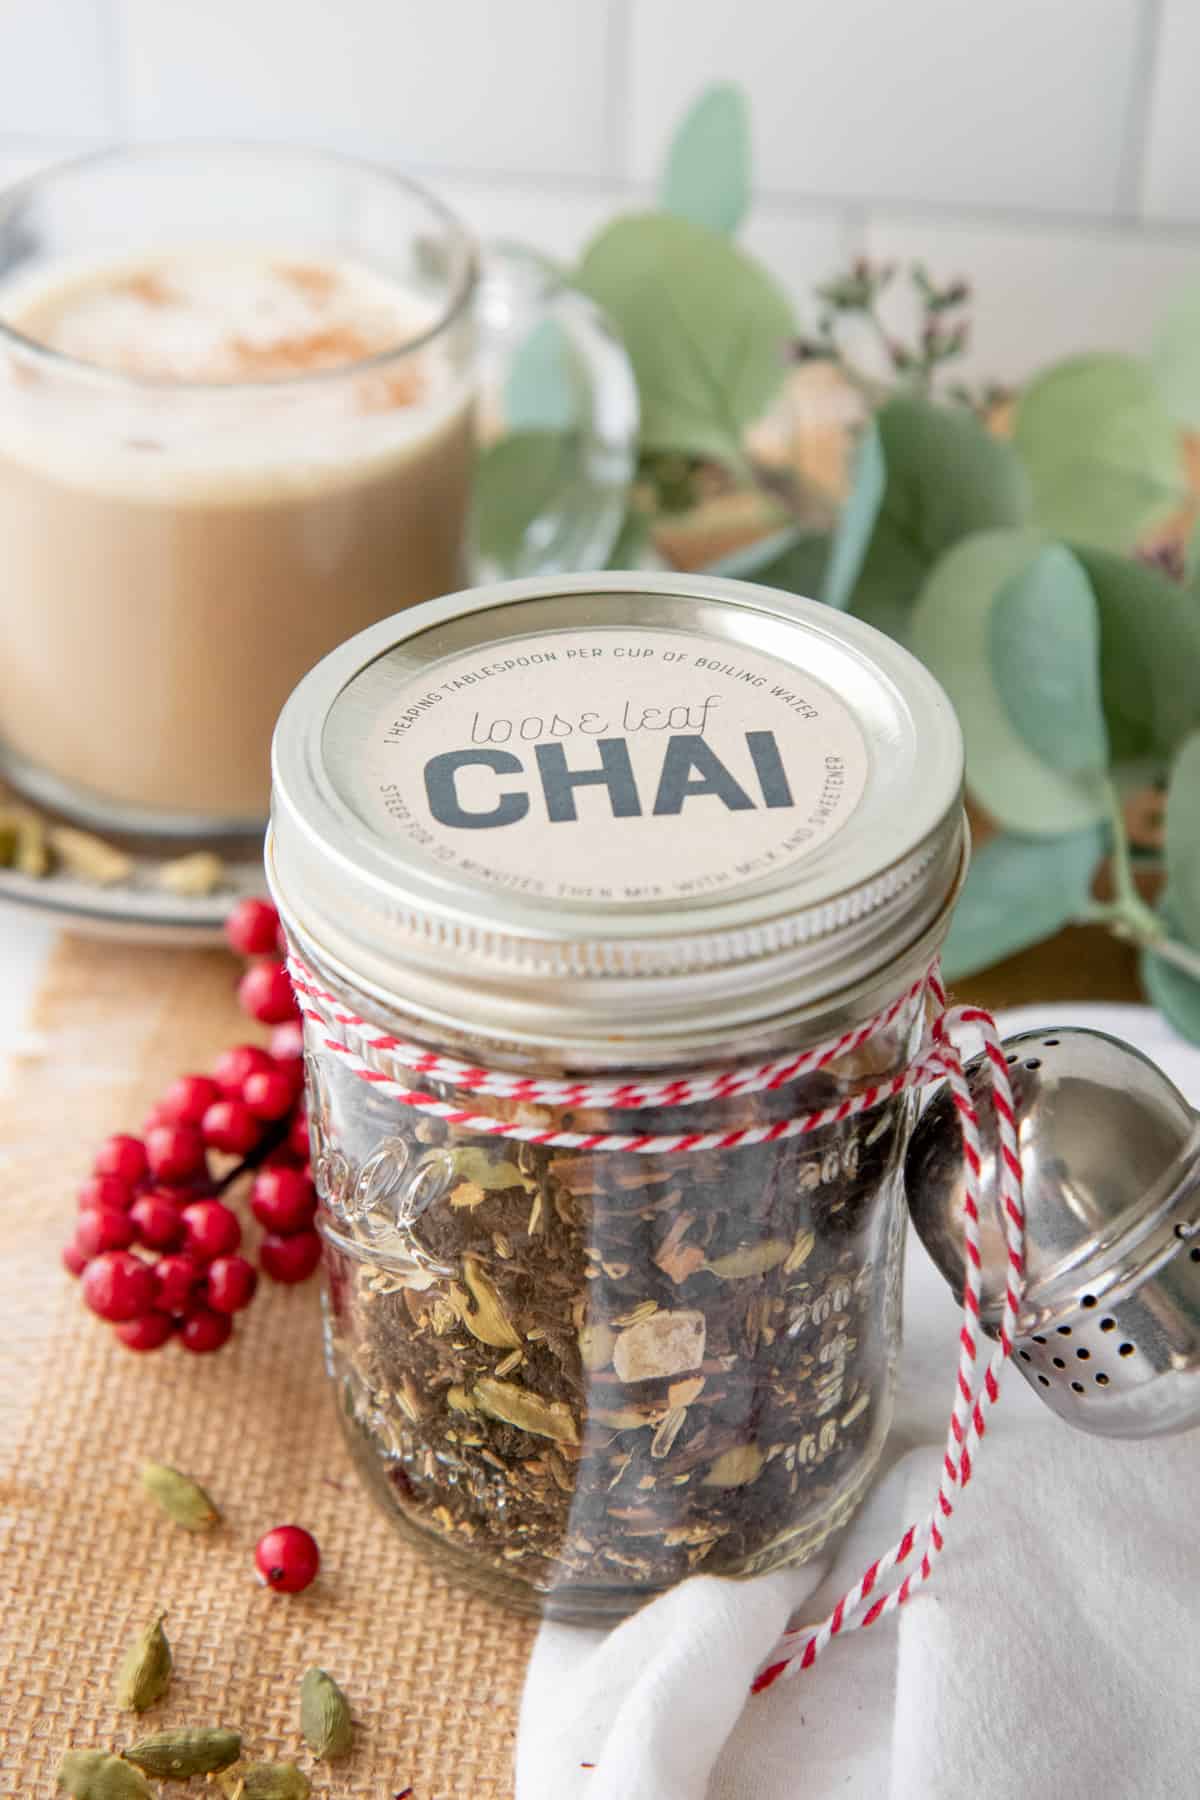 A glass jar filled with loose leaf tea is labeled as "Chai" and tied to a tea ball with baker's twine.